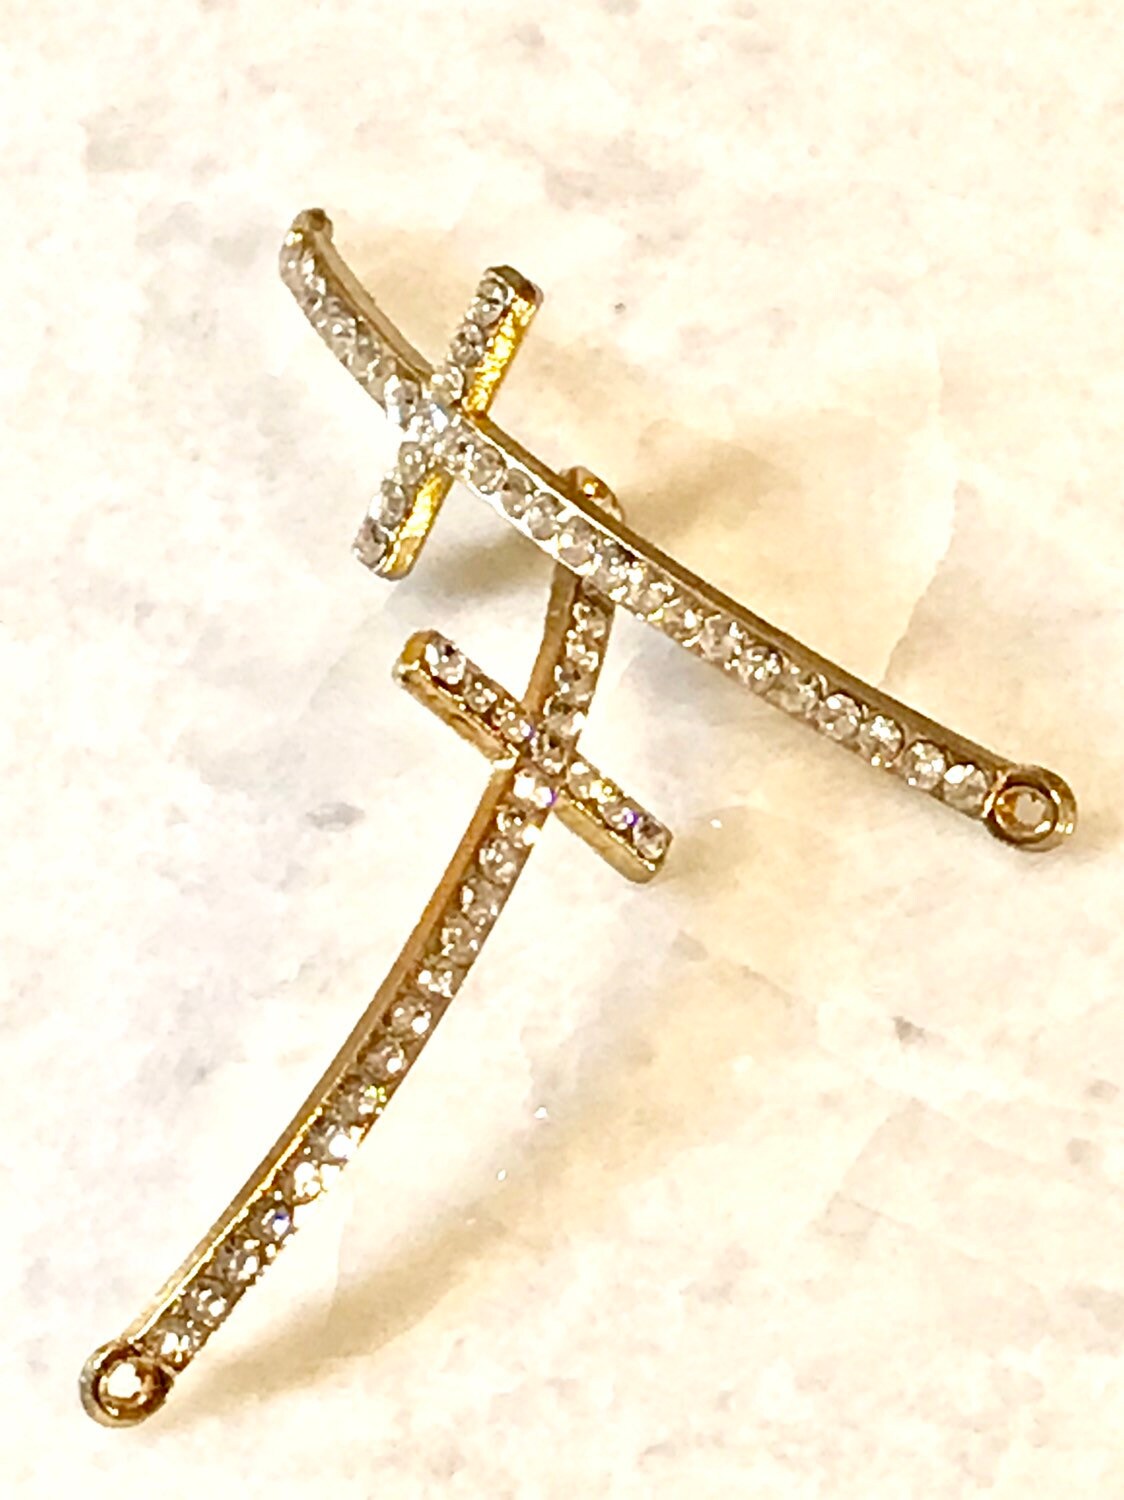 The Cross, Cross Connector, Cross Beads, Connector Findings, Beads